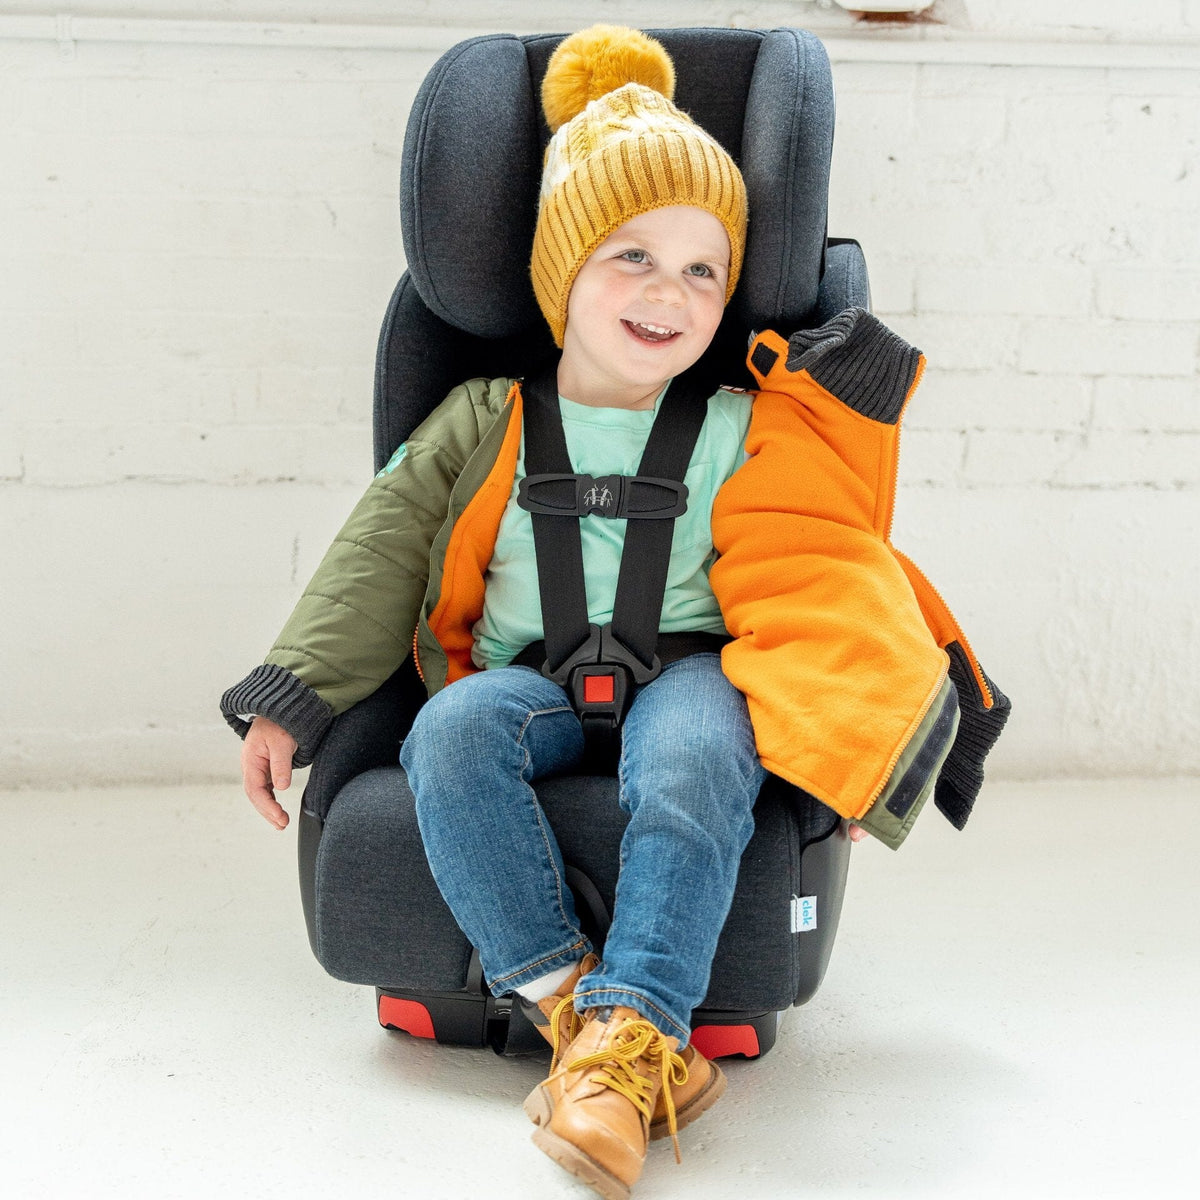 Buckle Me Baby Coats - Safer Car Seat Baby Boys Winter Baby Jacket